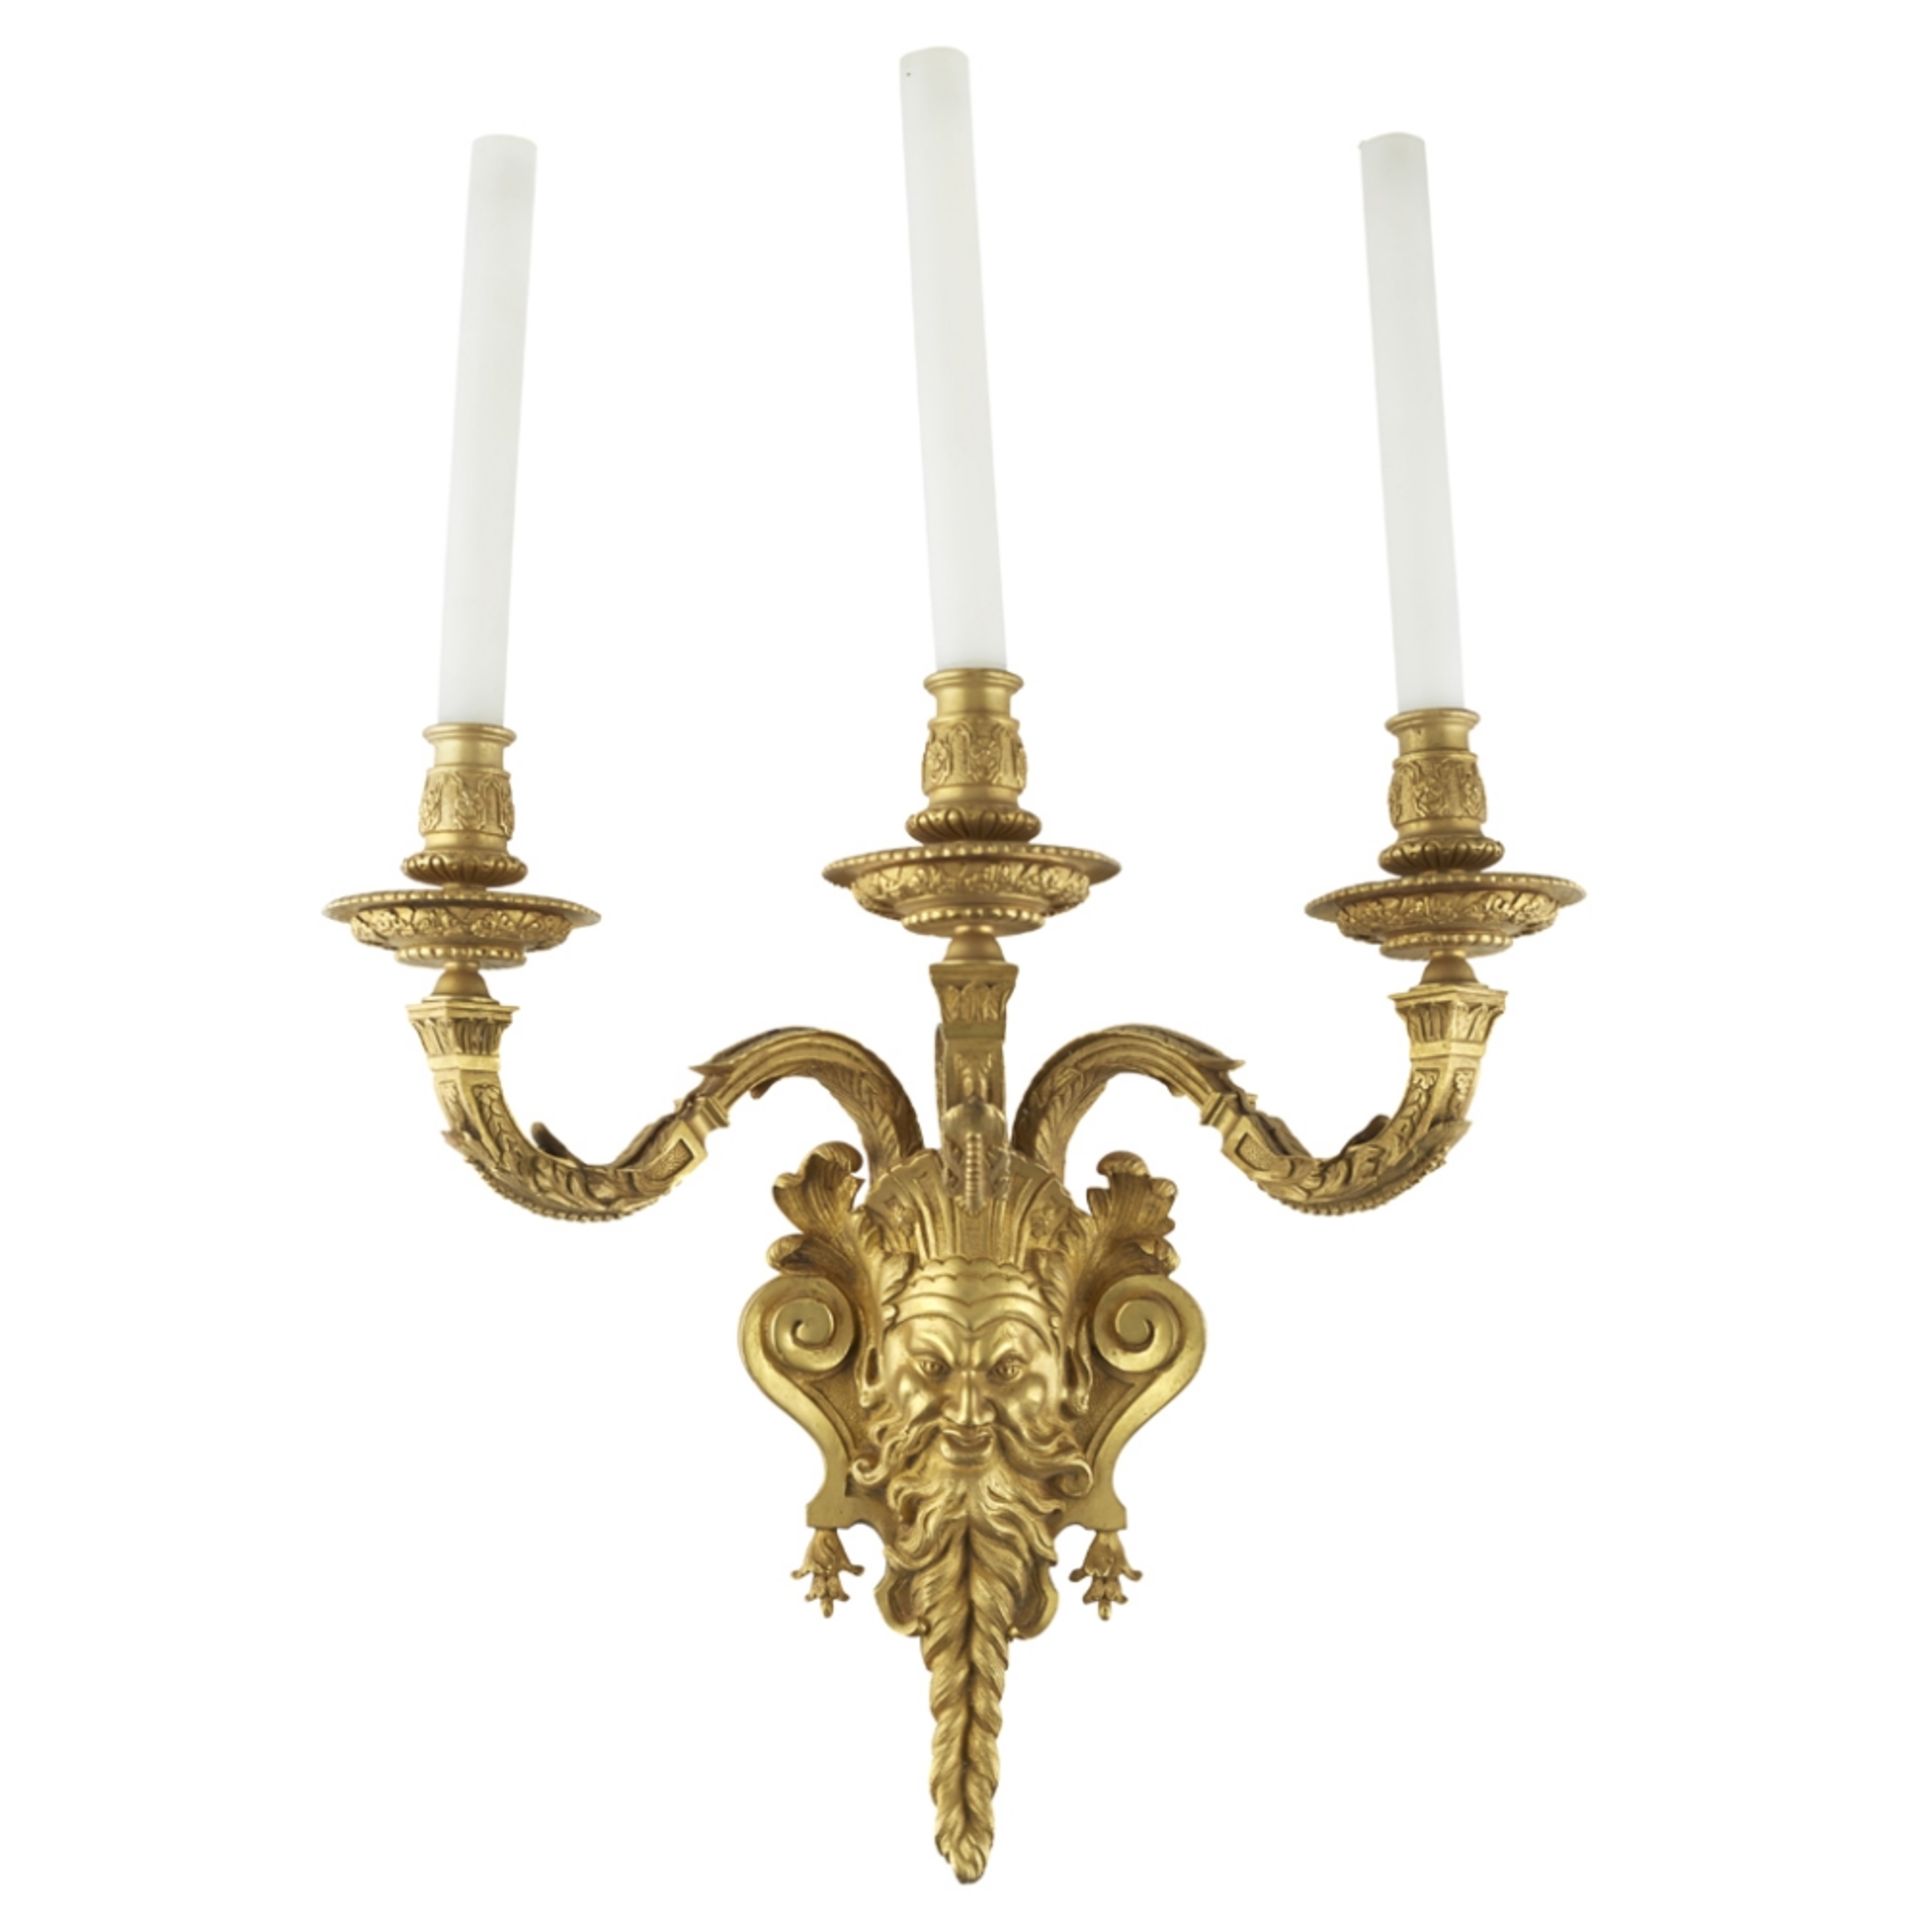 SET OF THREE GILT BRONZE WALL LIGHTSLATE 19TH CENTURY with three outscrolling arms above a large - Image 2 of 2